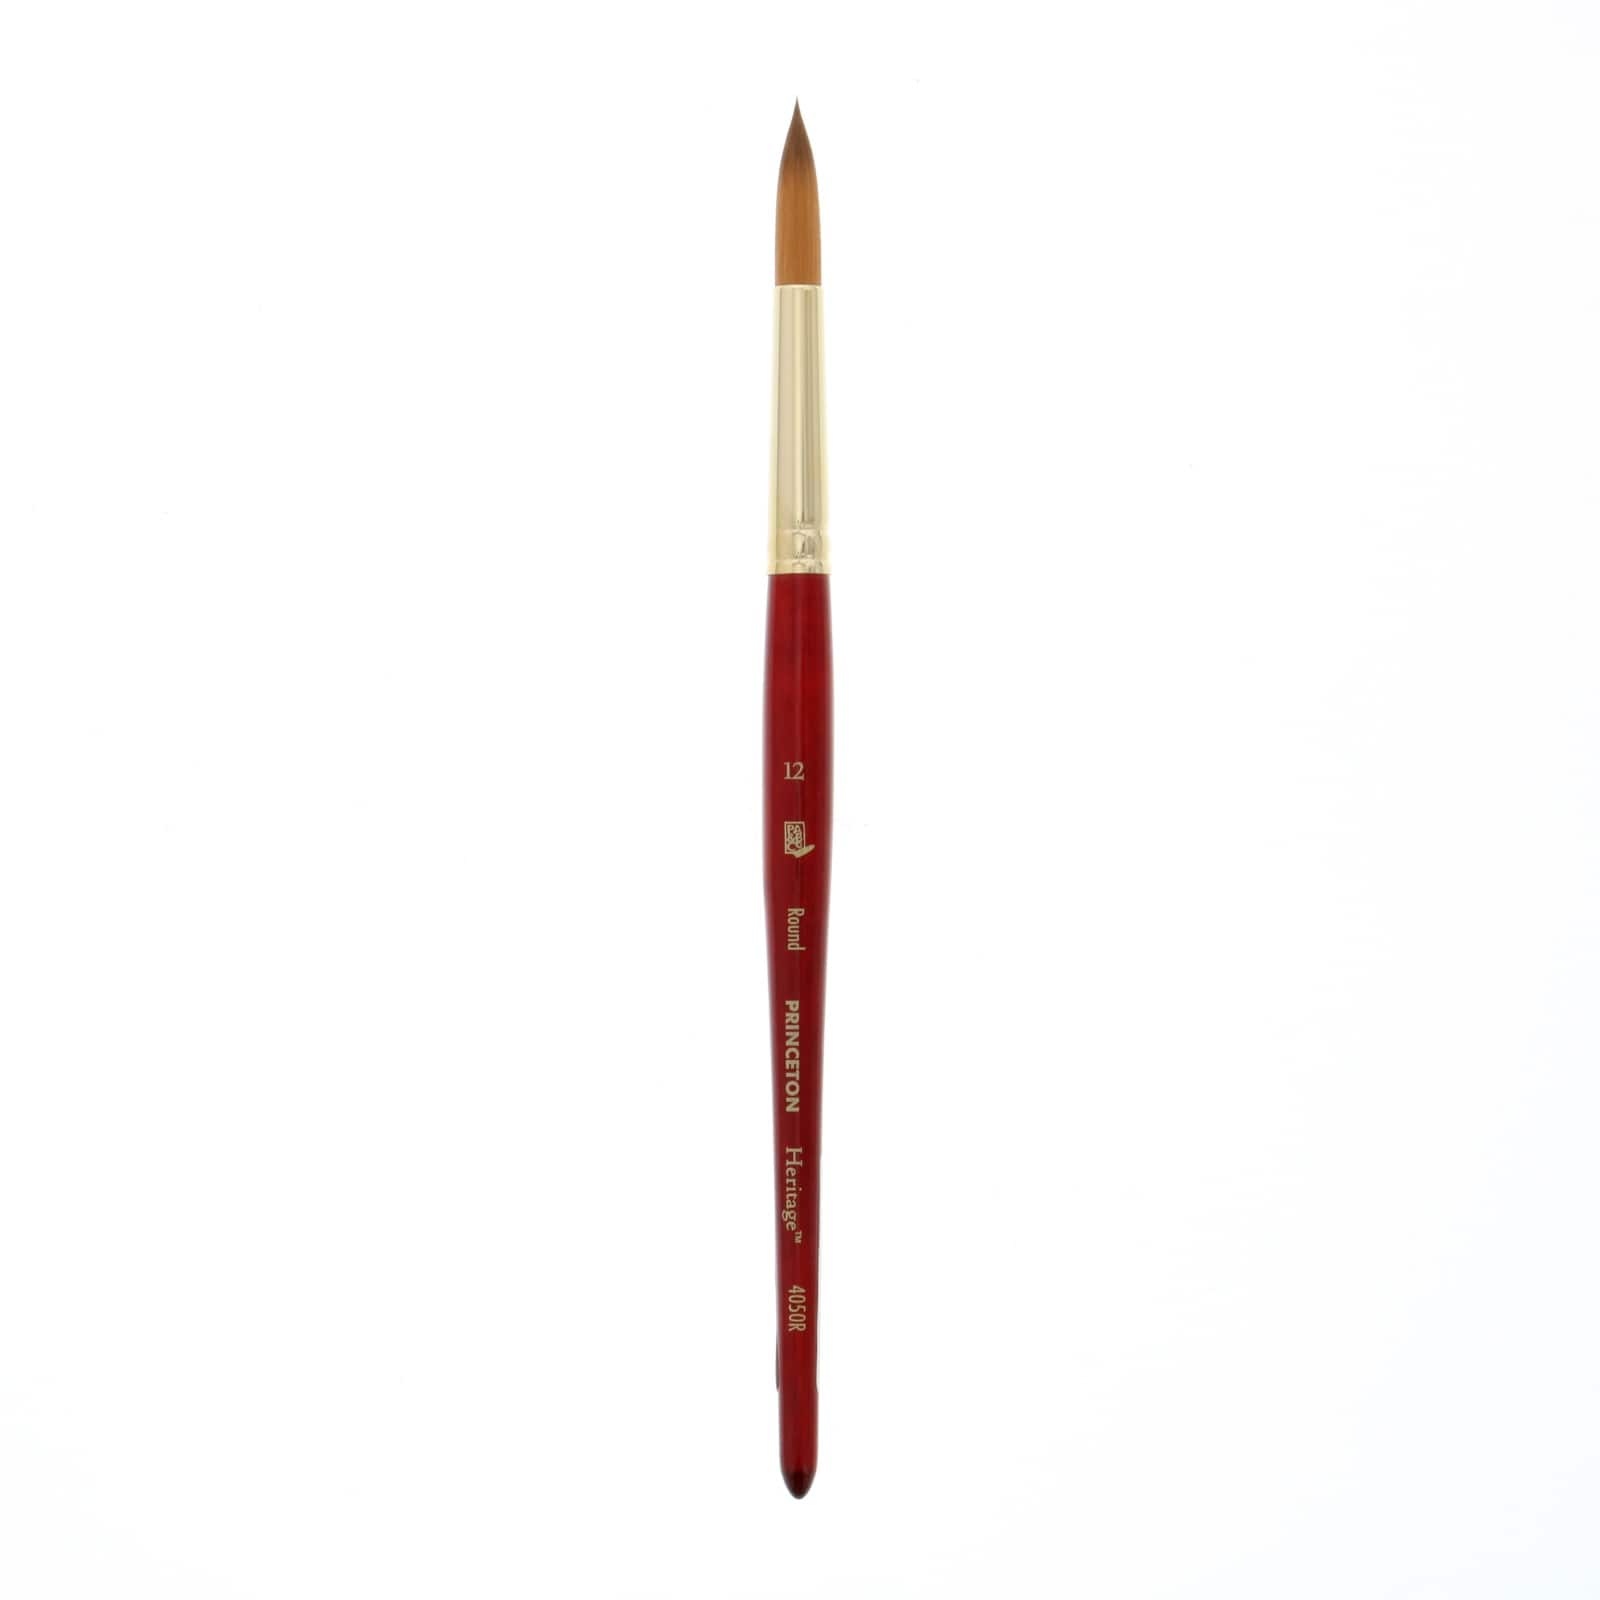 Princeton™ Heritage Synthetic Sable Watercolor & Acrylic Grainer Brush,  1/2